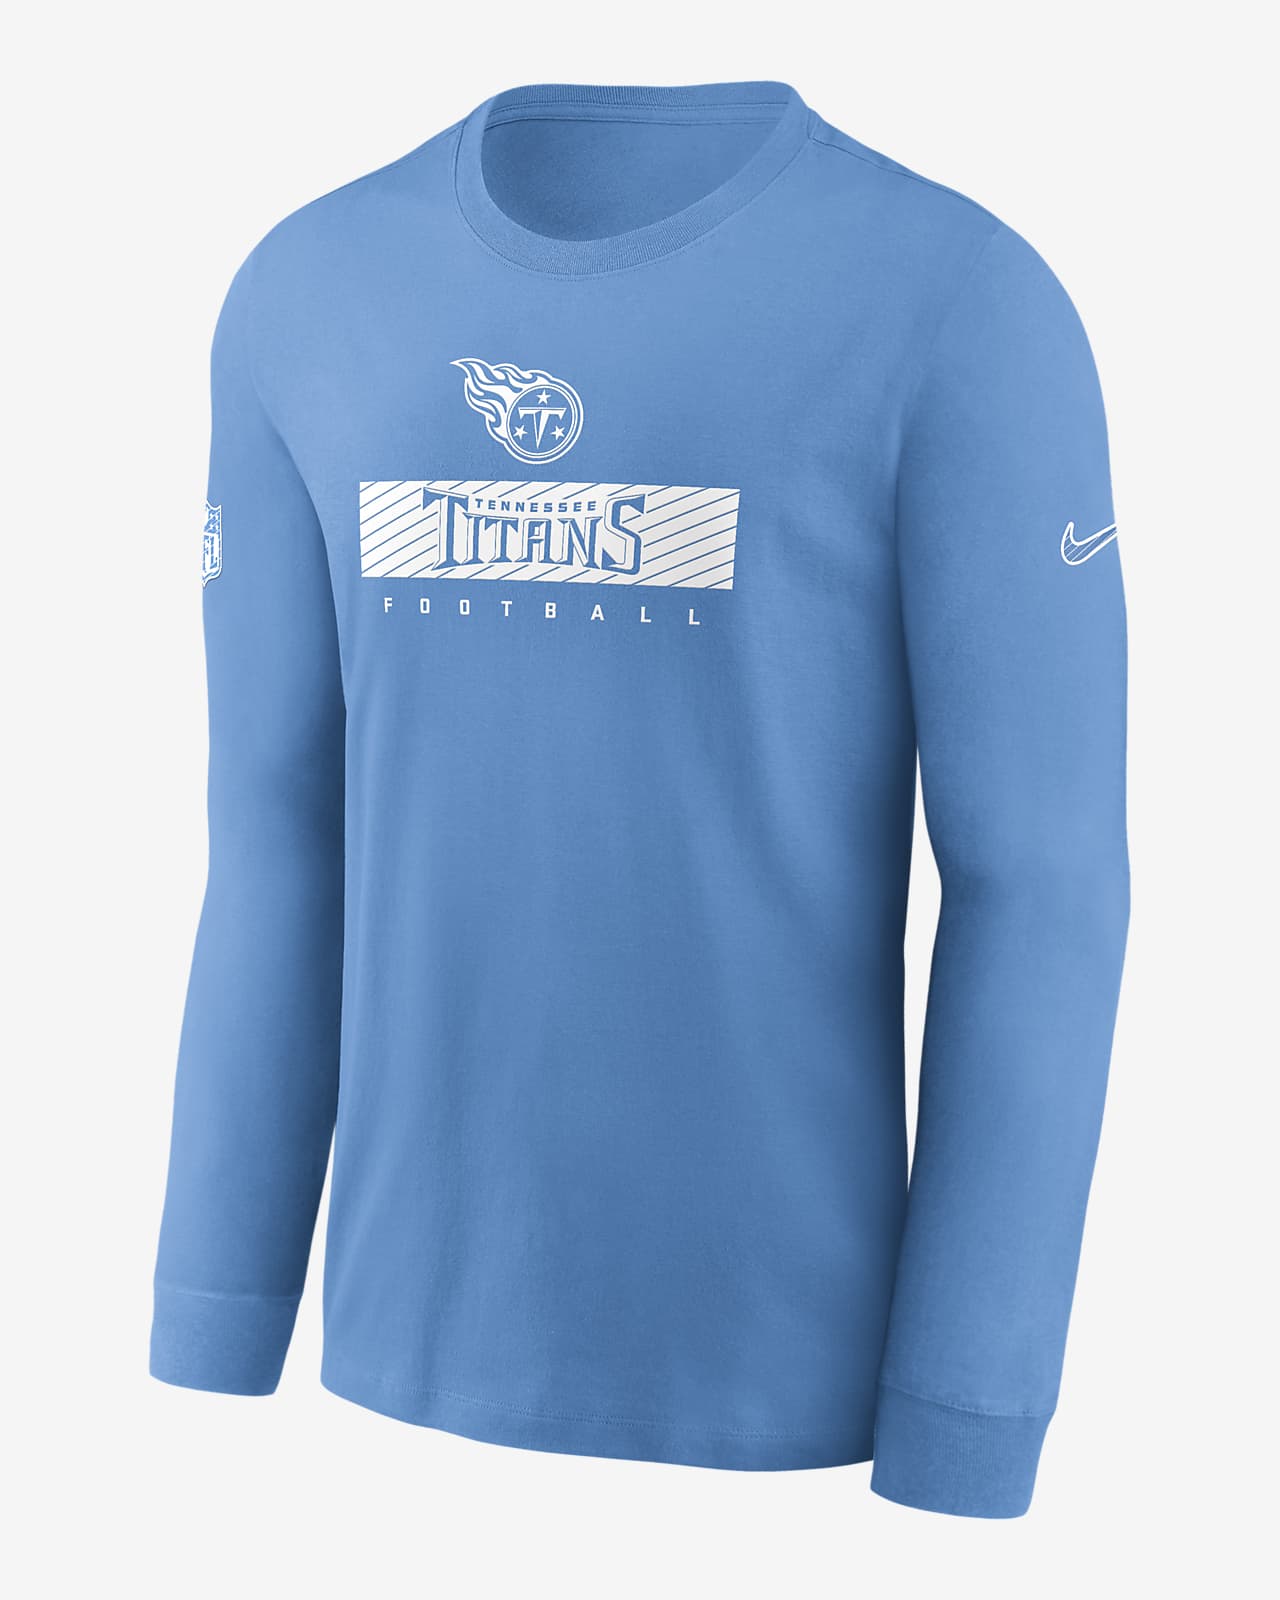 Tennessee Titans Sideline Team Issue Men's Nike Dri-FIT NFL Long-Sleeve T-Shirt